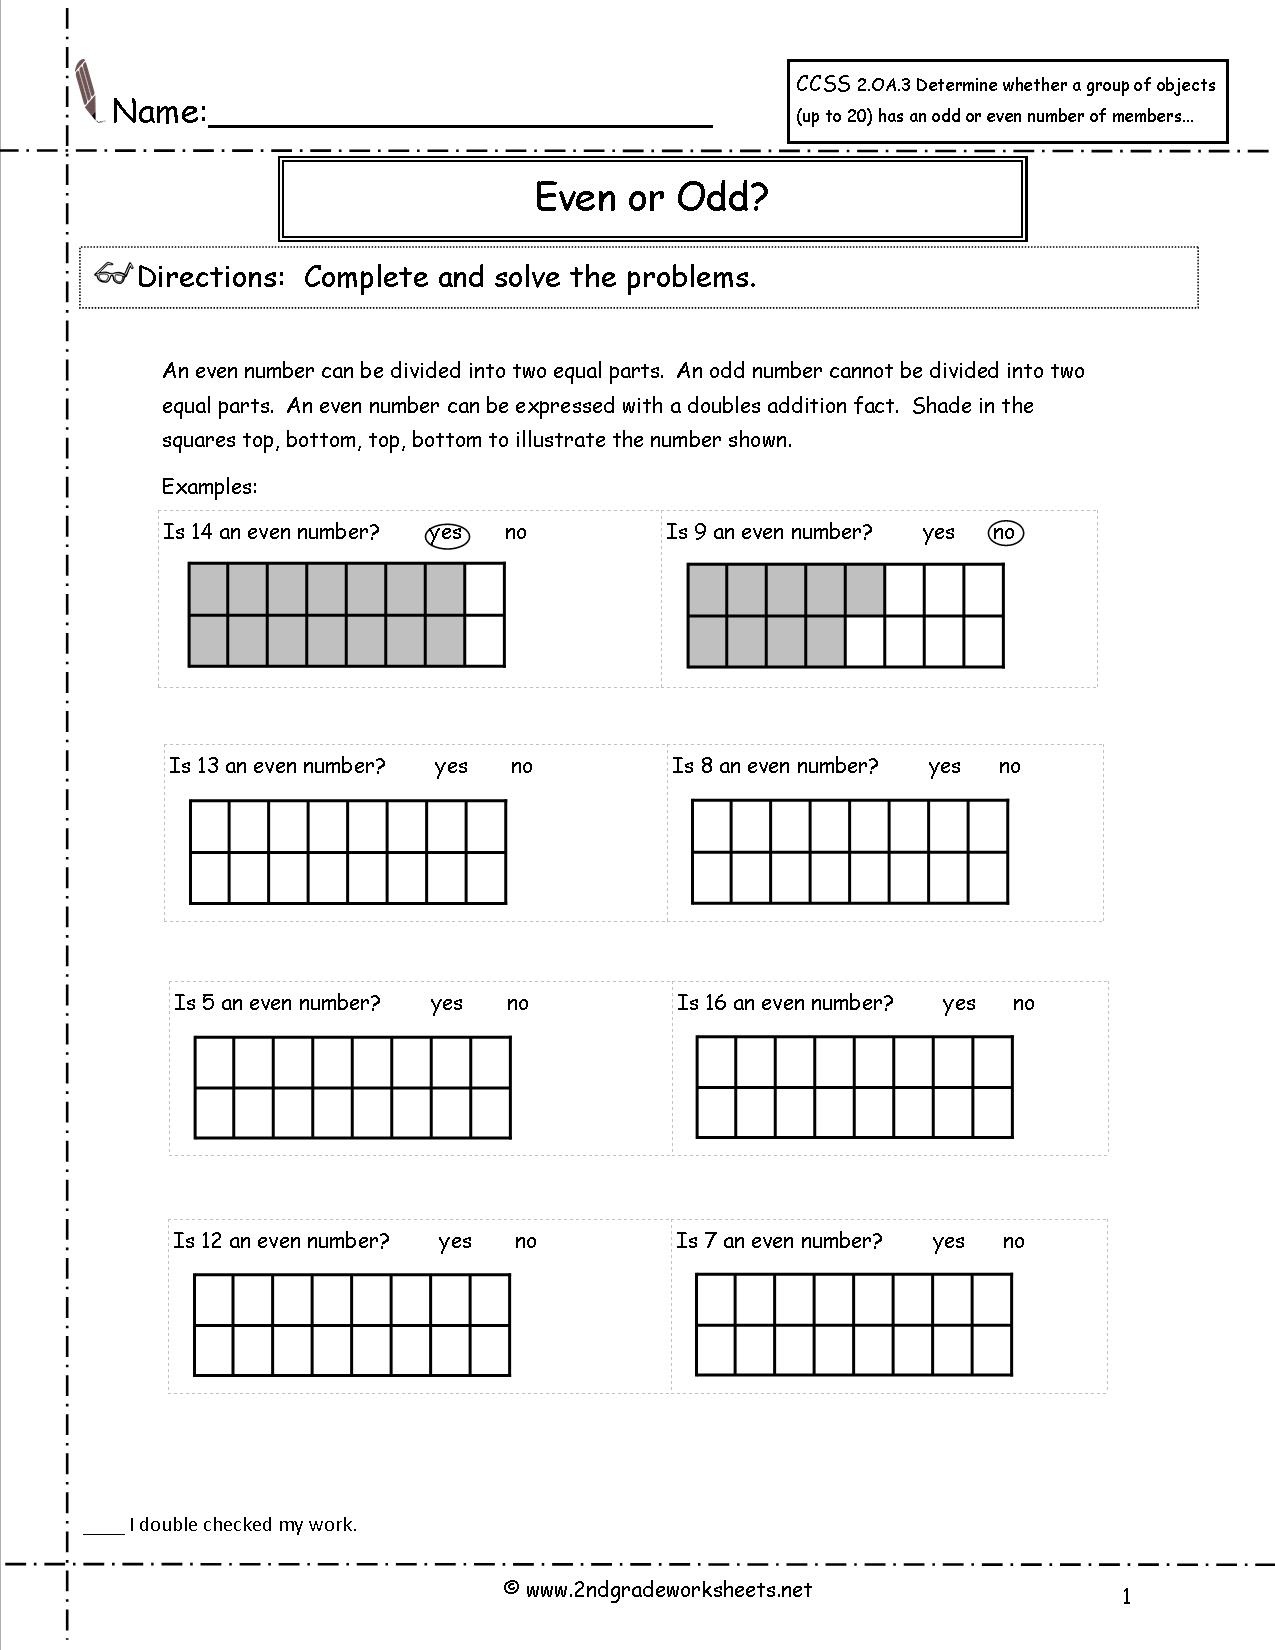 2Nd Grade Math Common Core State Standards Worksheets - Free Printable Science Worksheets For Grade 2